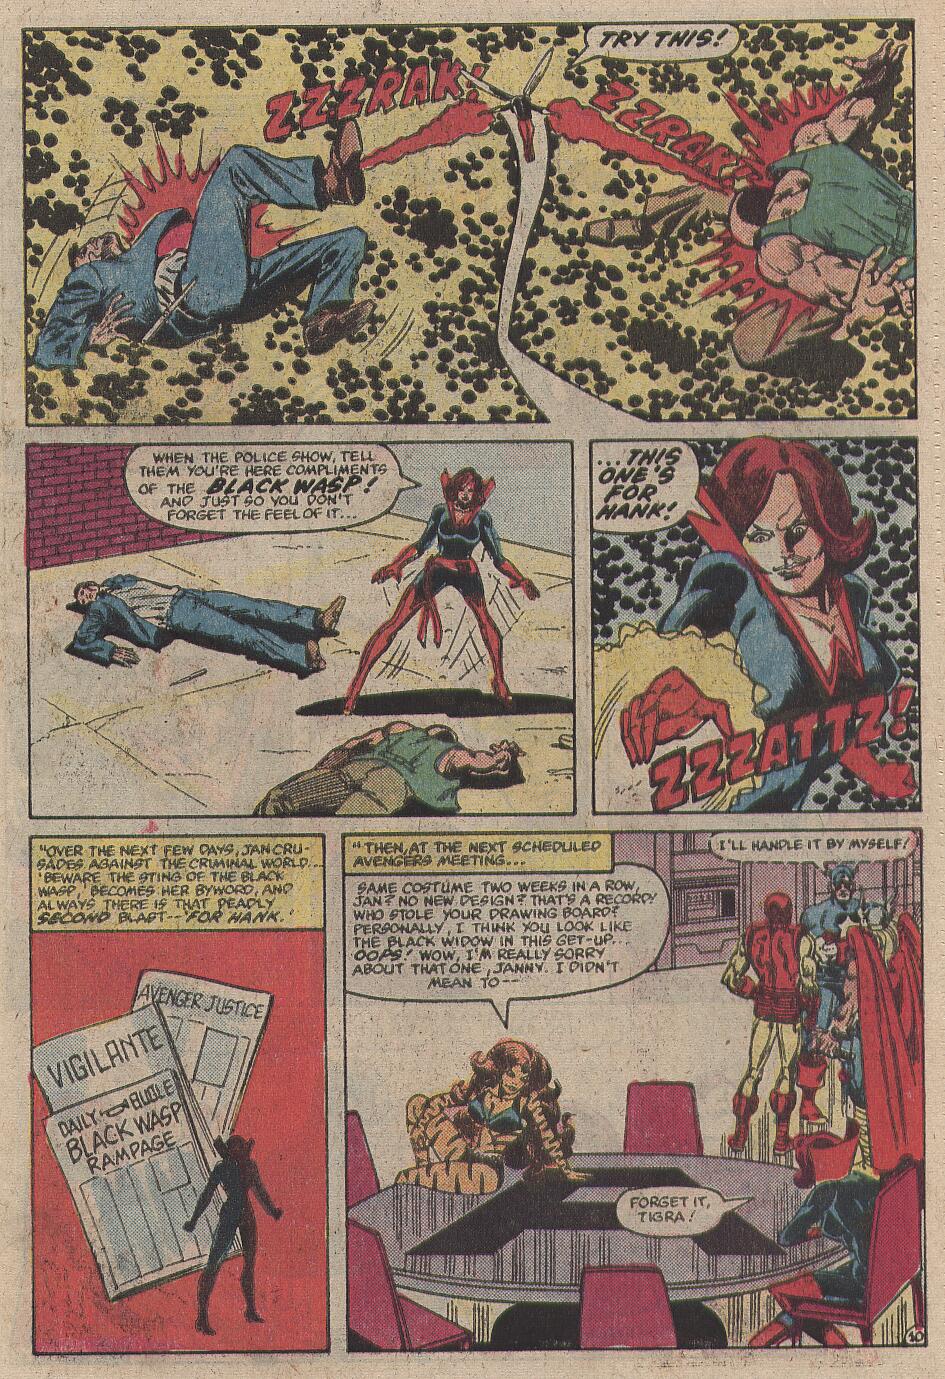 What If? (1977) issue 35 - Elektra had lived - Page 35